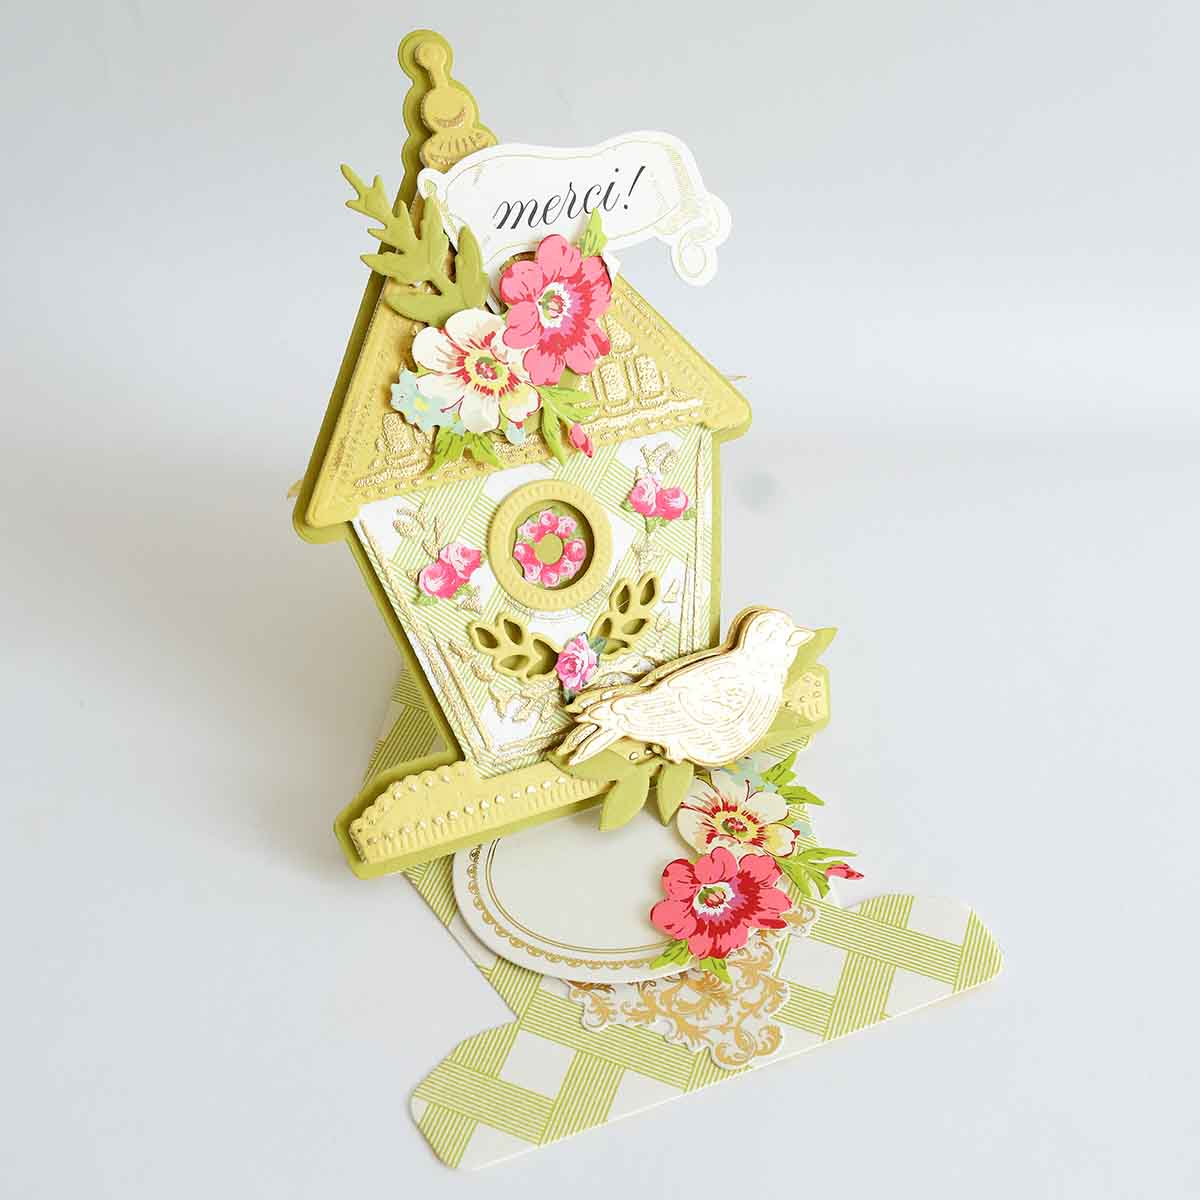 a card with a birdhouse and flowers on it.